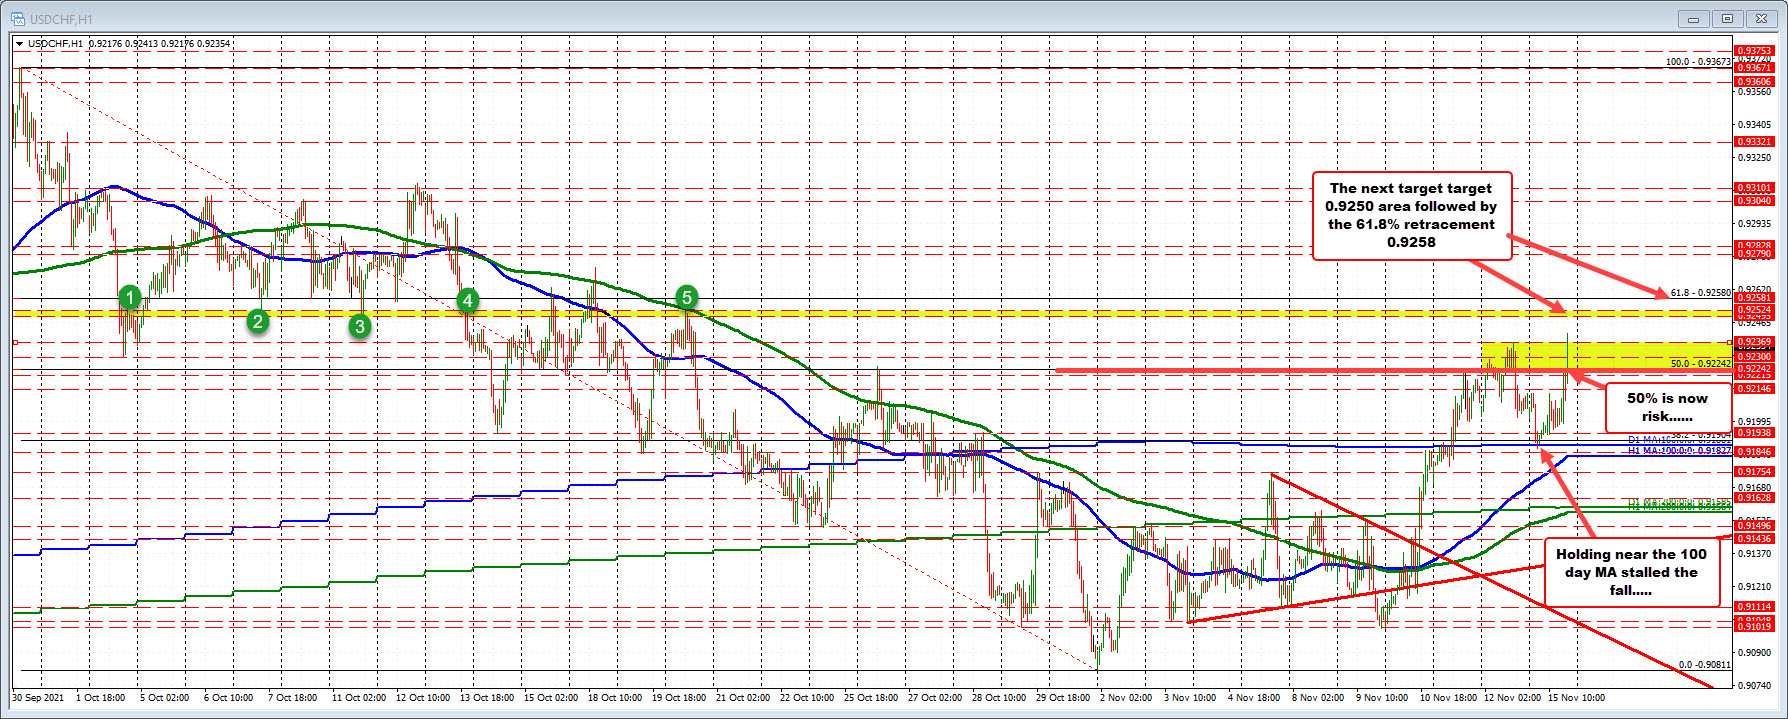 50% midpoint at 0.9224 in the USDCHF